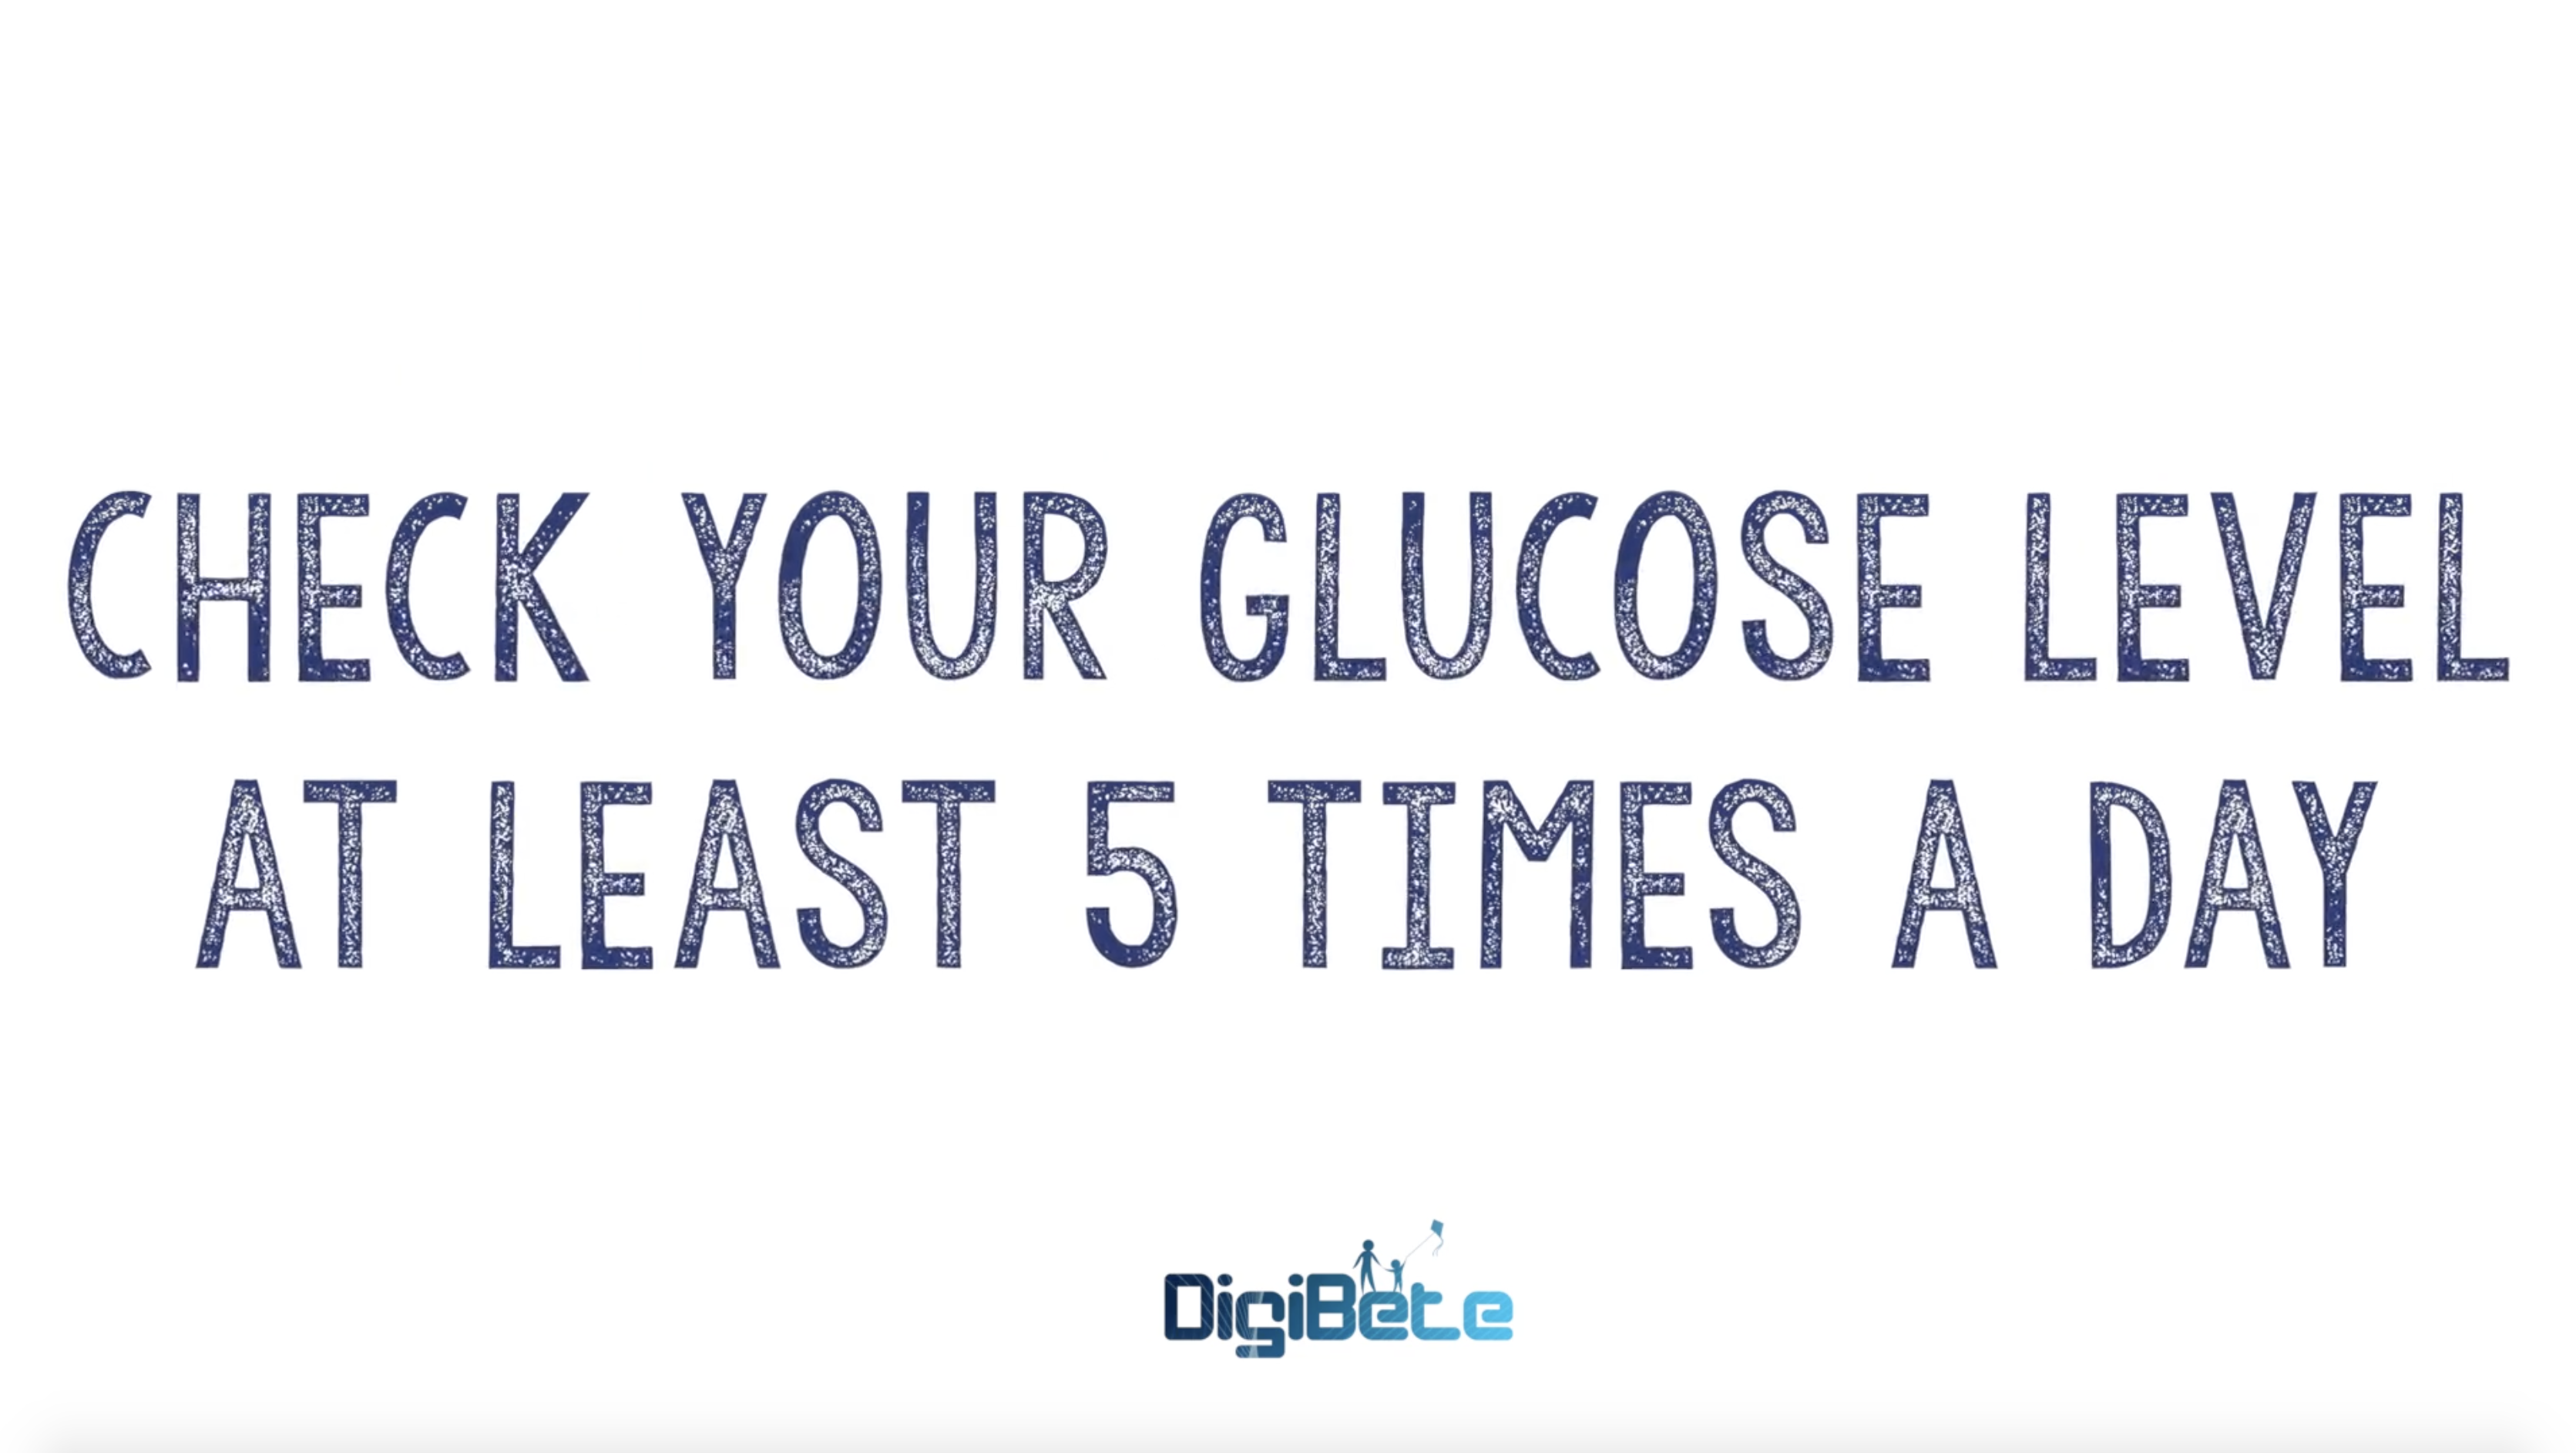 Diabetes Essentials : Check your glucose level at least 5 times a day